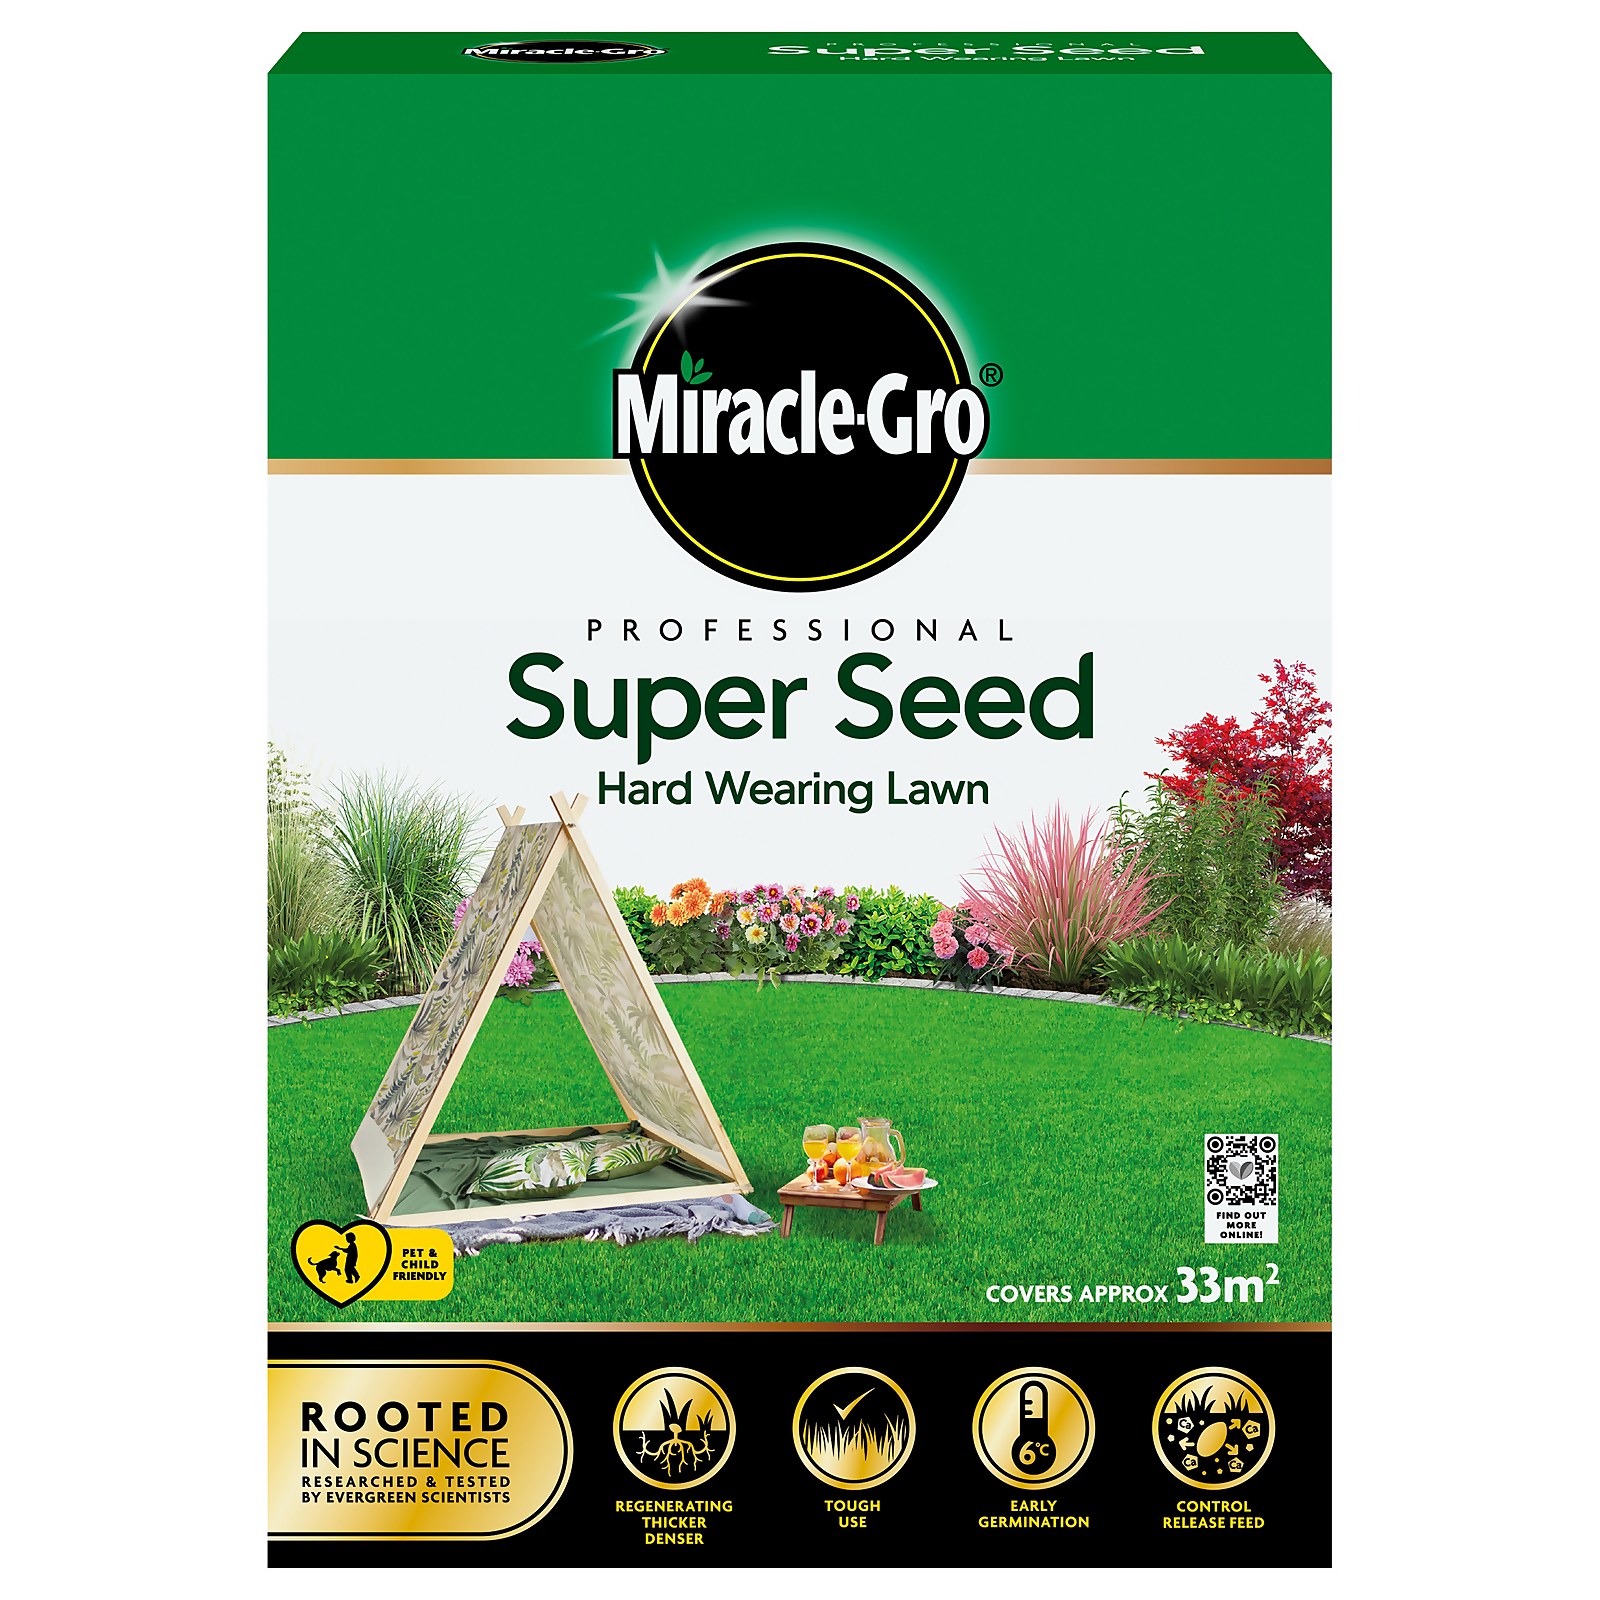 Photo of Miracle-gro Professional Super Seed Hard Wearing Lawn 33m2 - 1kg